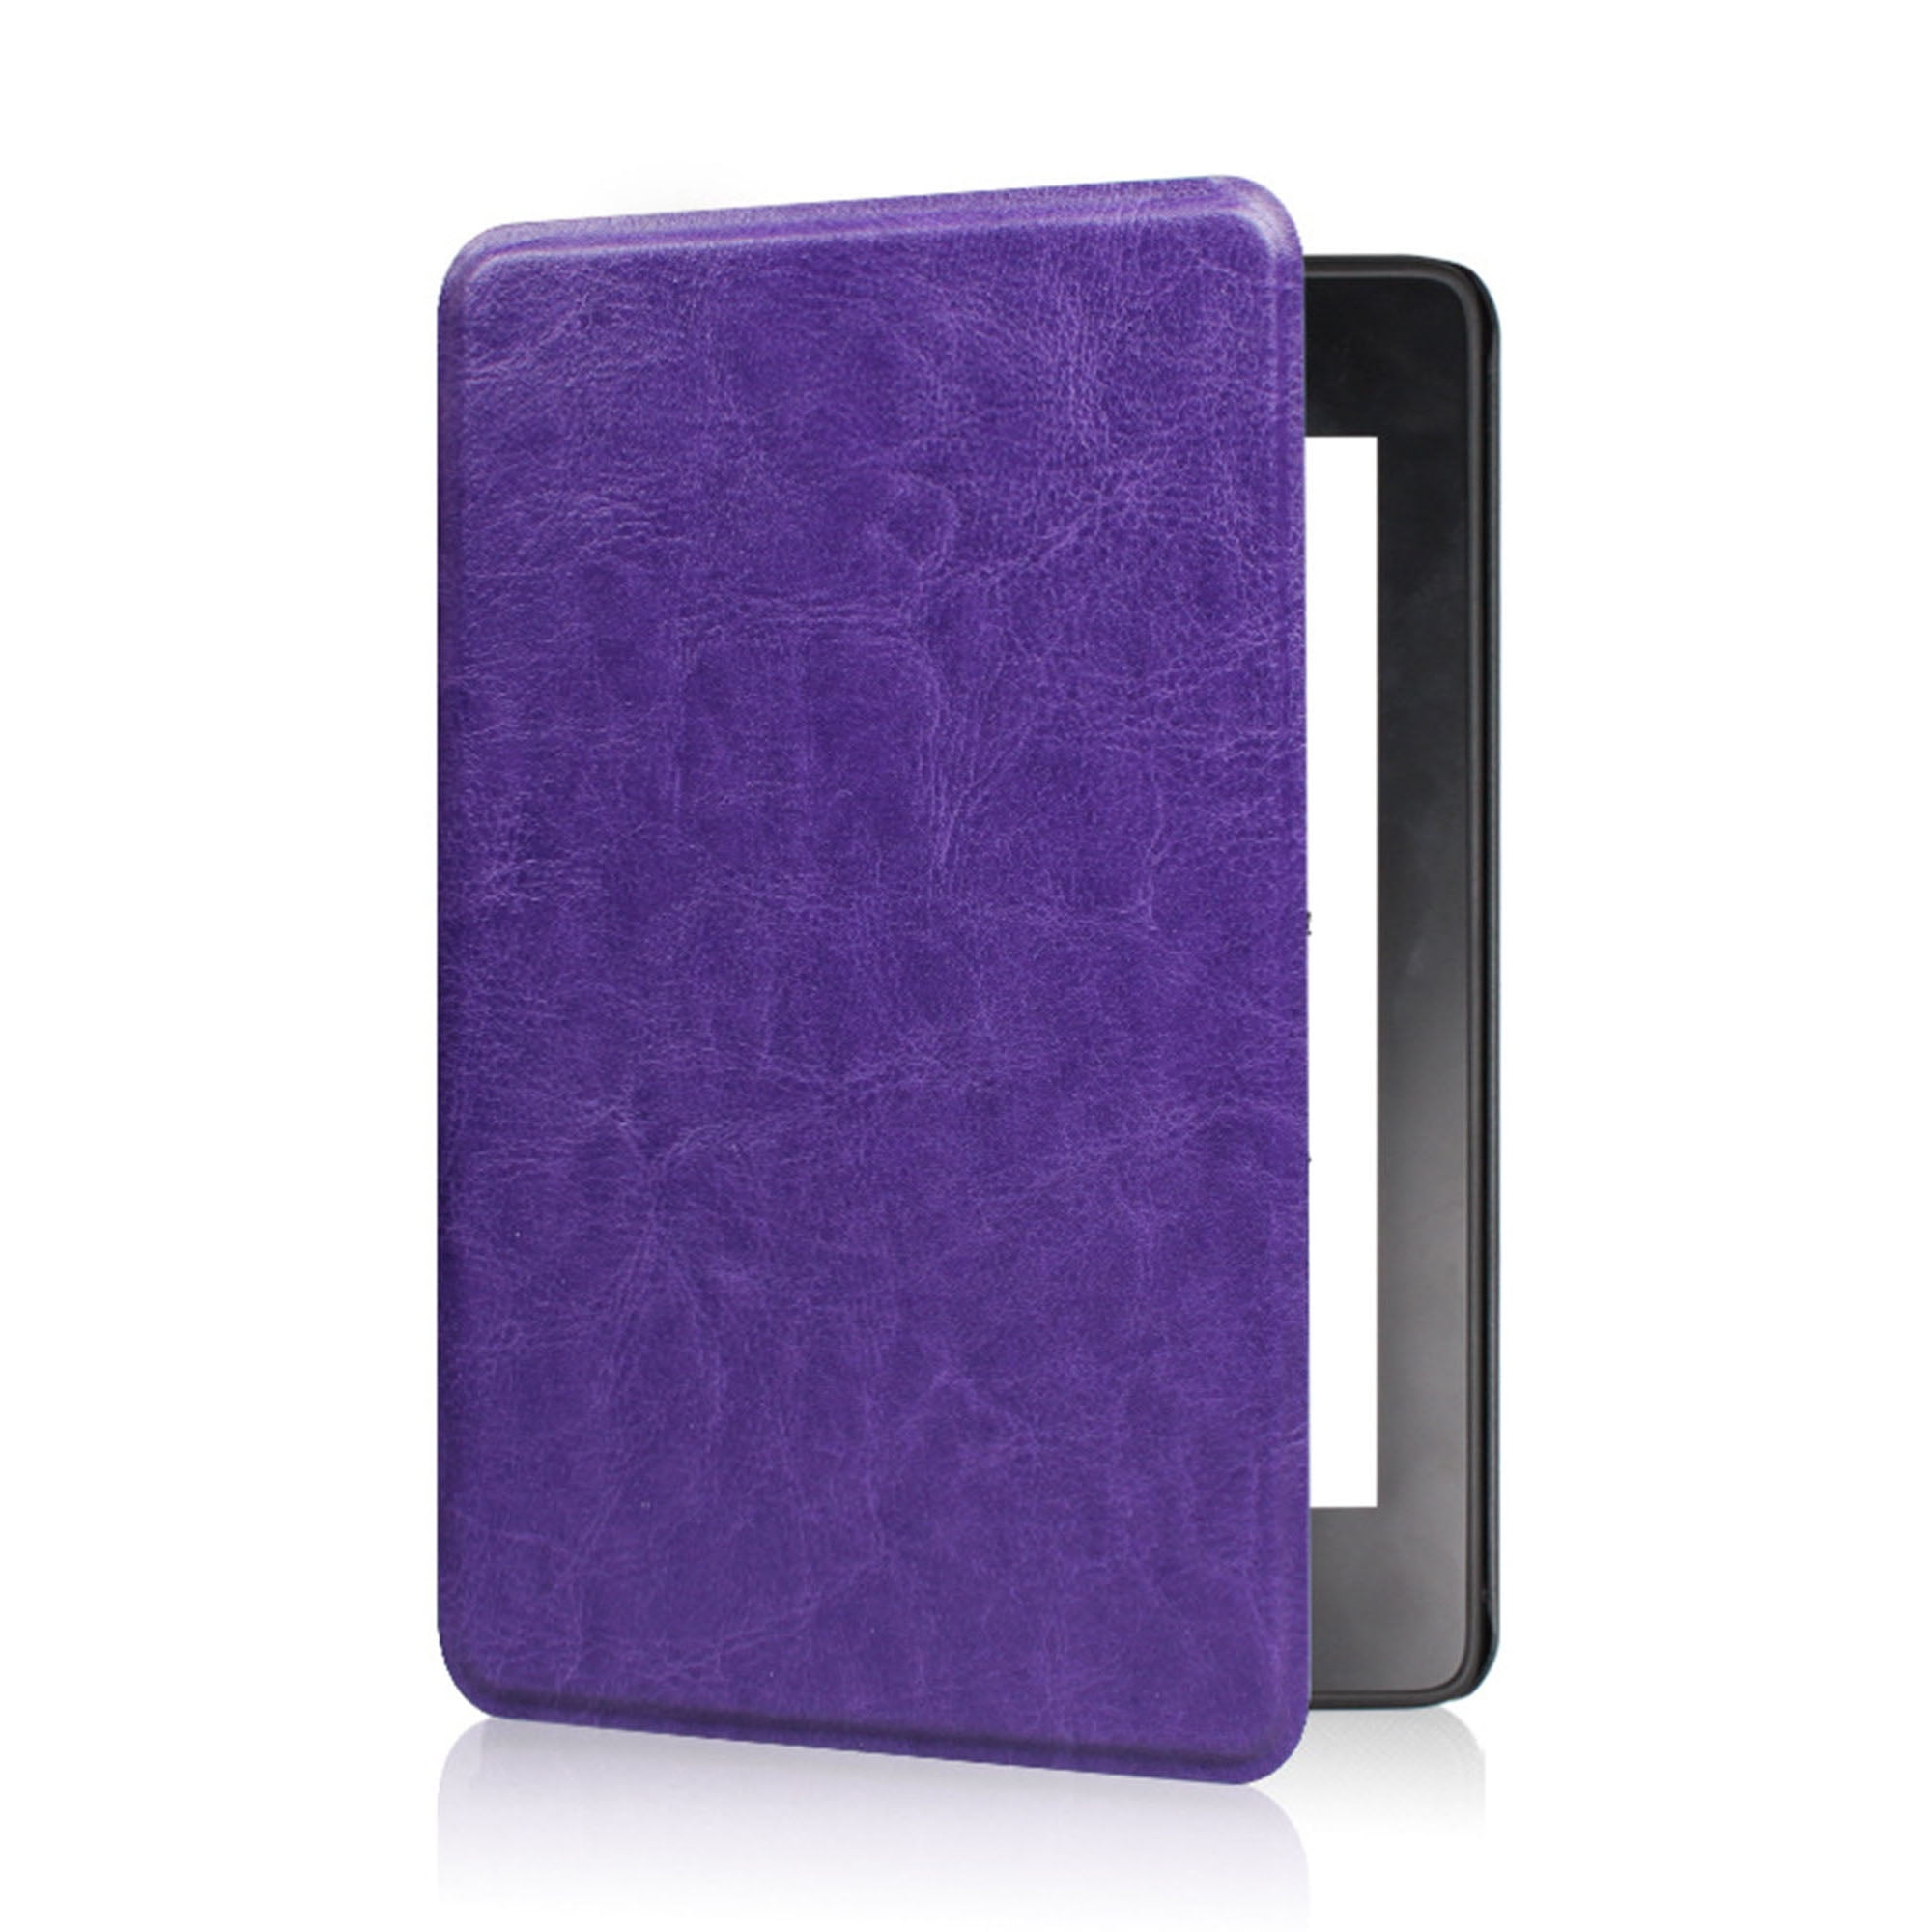 Etui For Kindle 2022 Smart Case 11th Gen 6 inch PU Leather Hard Ereader  Cover For Funda Kindle 11th Generation 2022 Case Cover - AliExpress